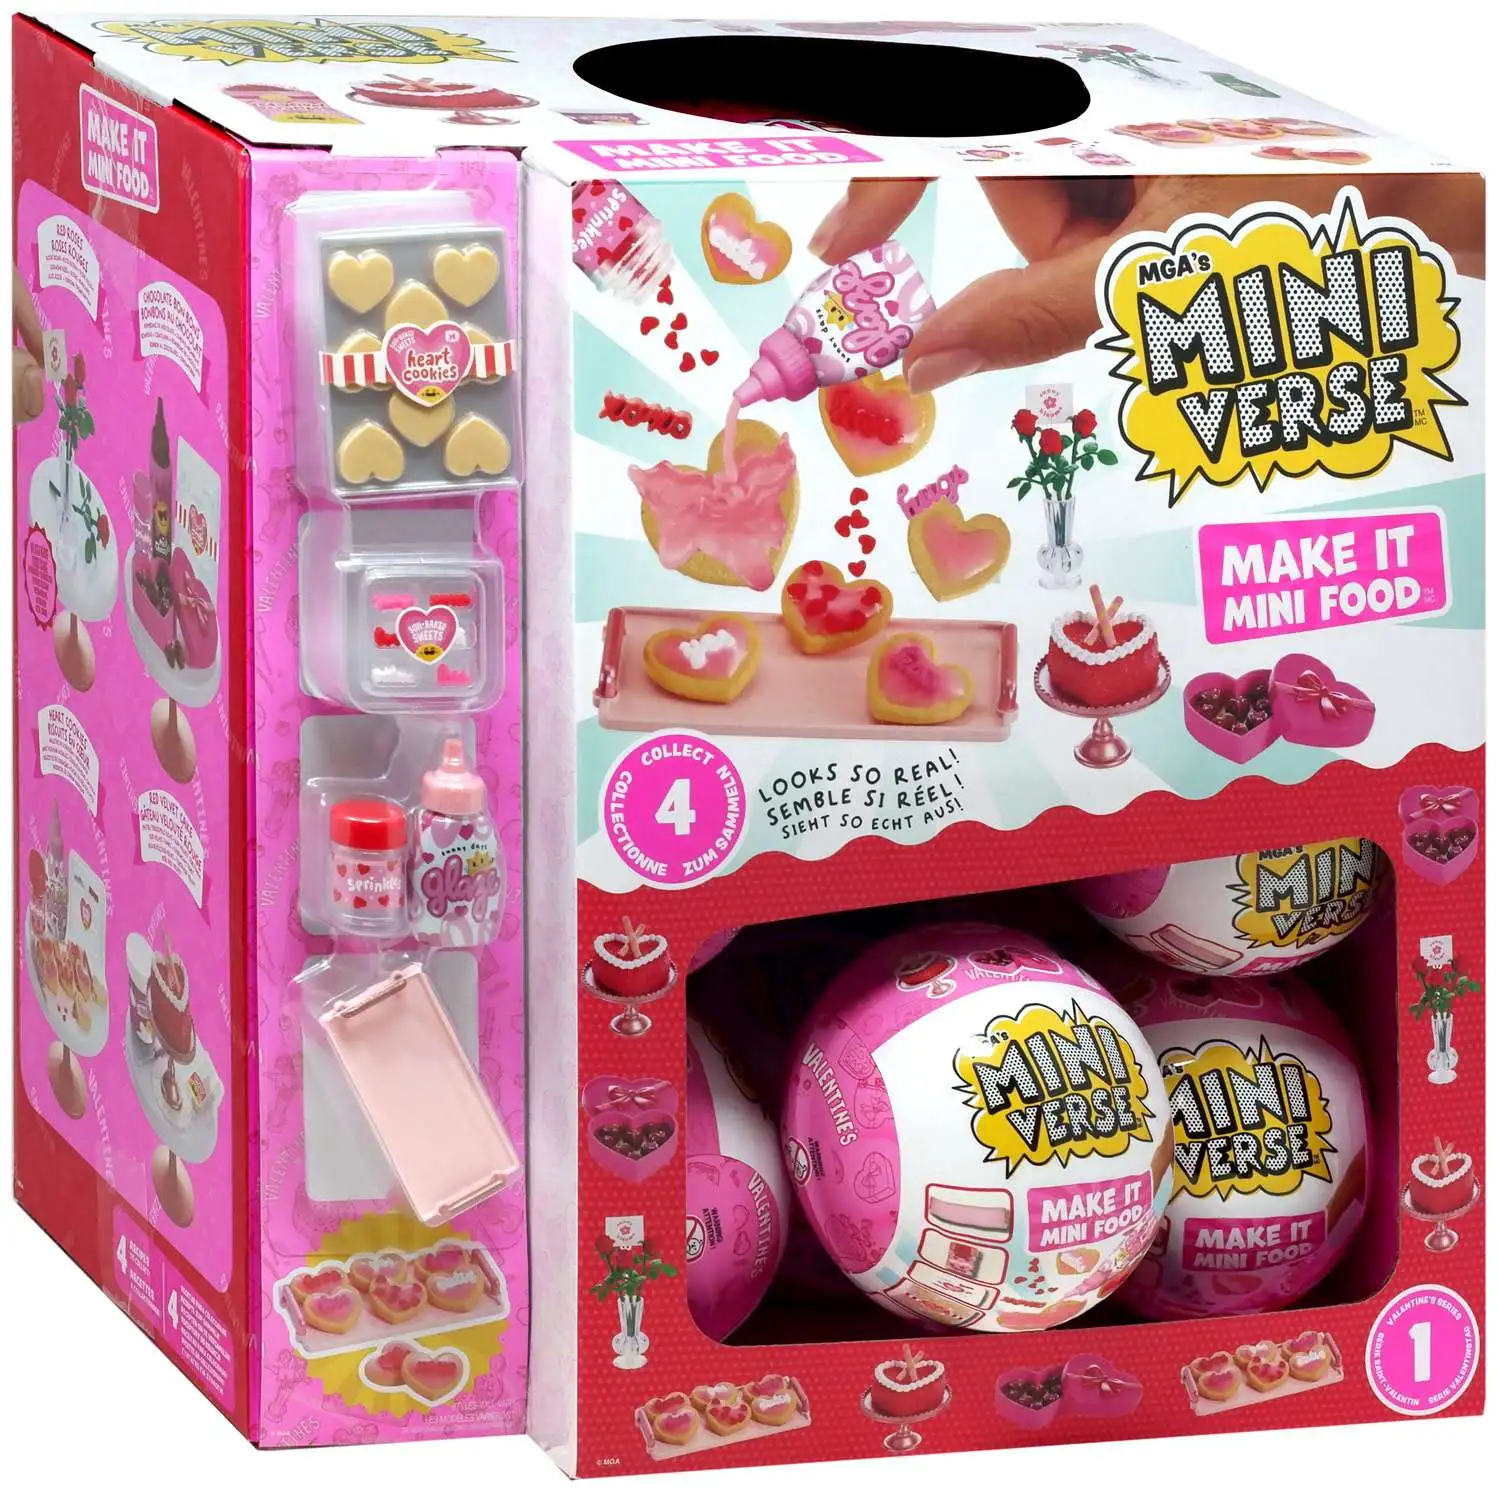 Miniverse Make It Mini Food CAFE DINER Exclusive Mystery 6-Pack MGA  Entertainment - ToyWiz